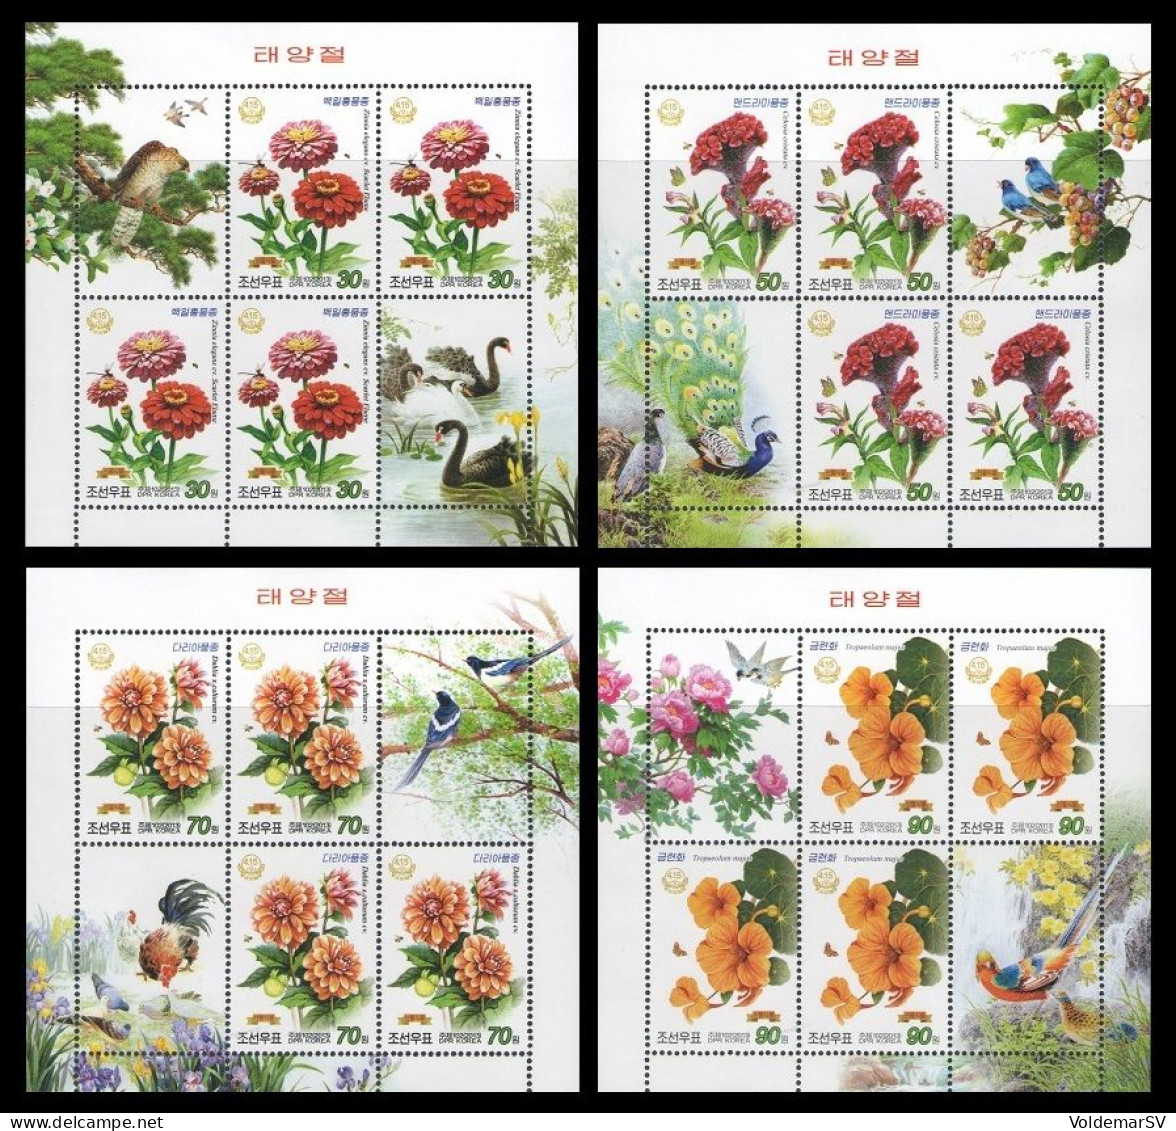 North Korea 2013 Mih. 5984/87 Flora And Fauna. Garden Flowers. Insects (4 M/S) MNH ** - Korea, North